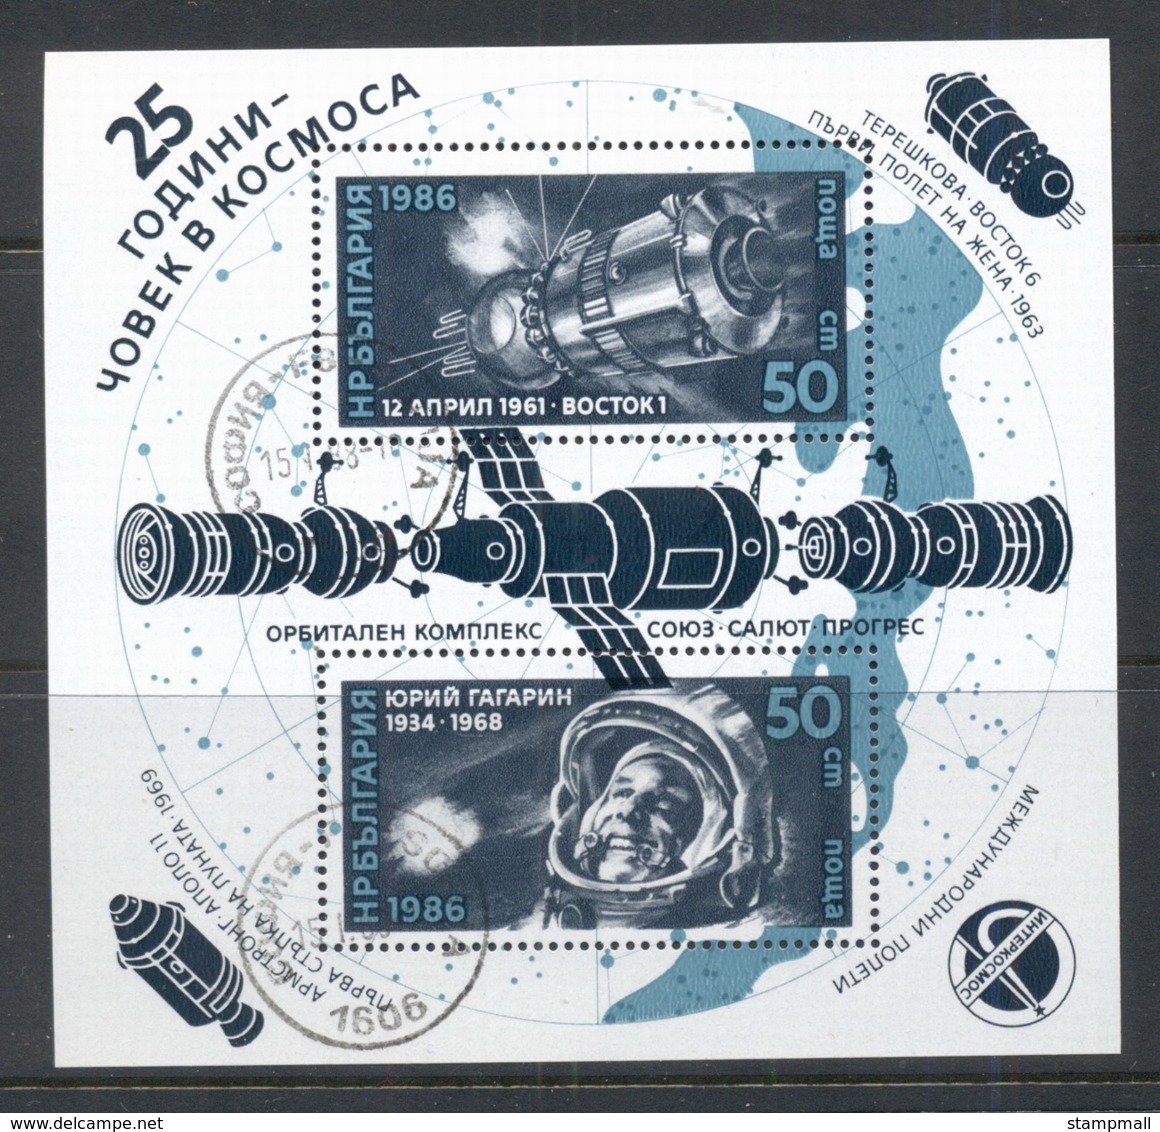 Bulgaria 1986 Manned Space Flight 25th Anniv. MS CTO - Unused Stamps